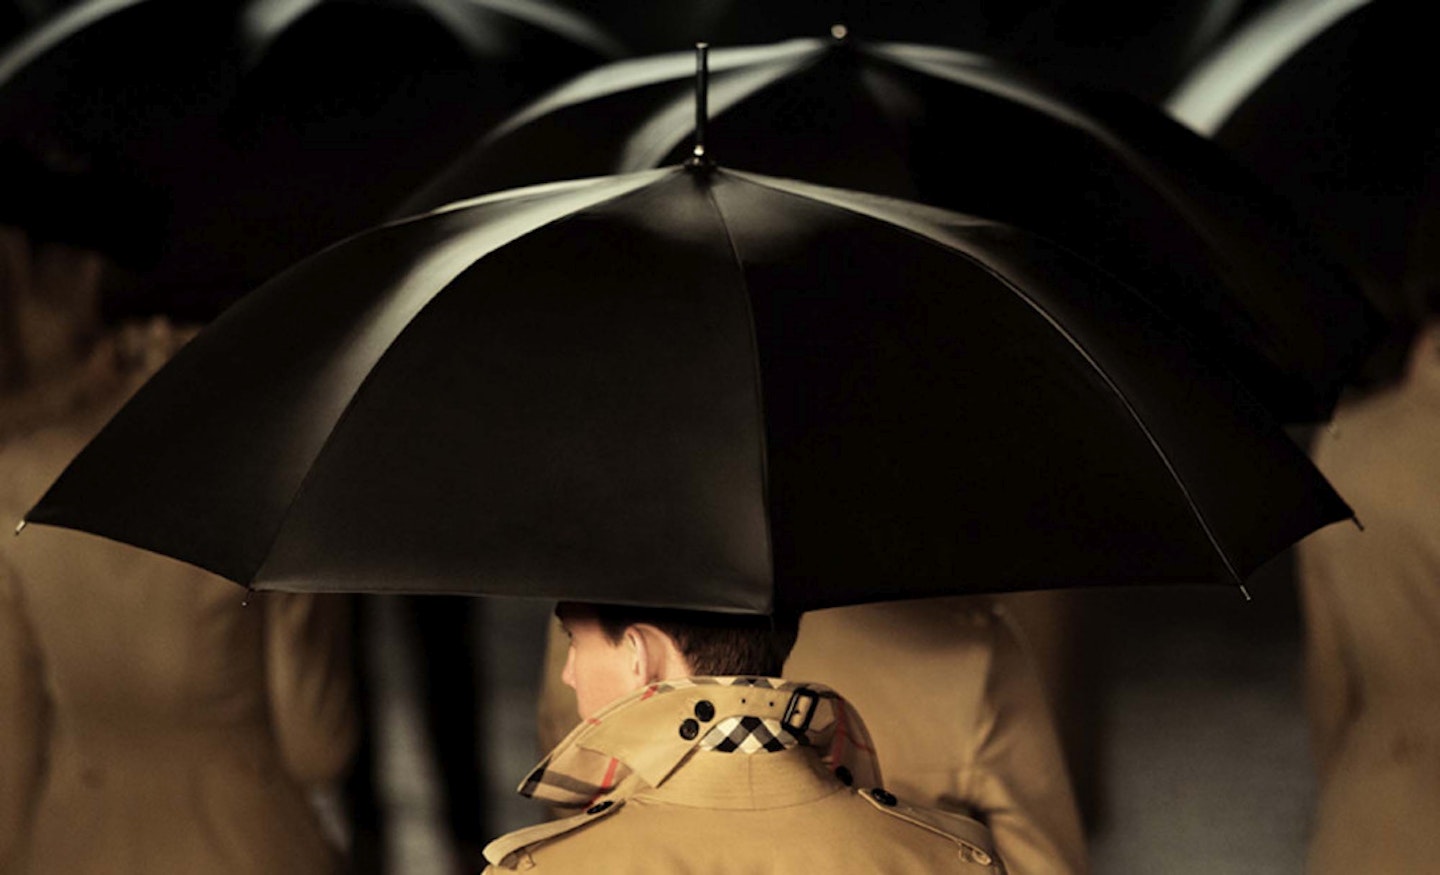 24._Burberry_Festive_Campaign_Stills__PRIVATE_AND_CONFIDENTIAL_-_ON_EMBARGO_9PM_UK_TIME_3_NOVEMBER_